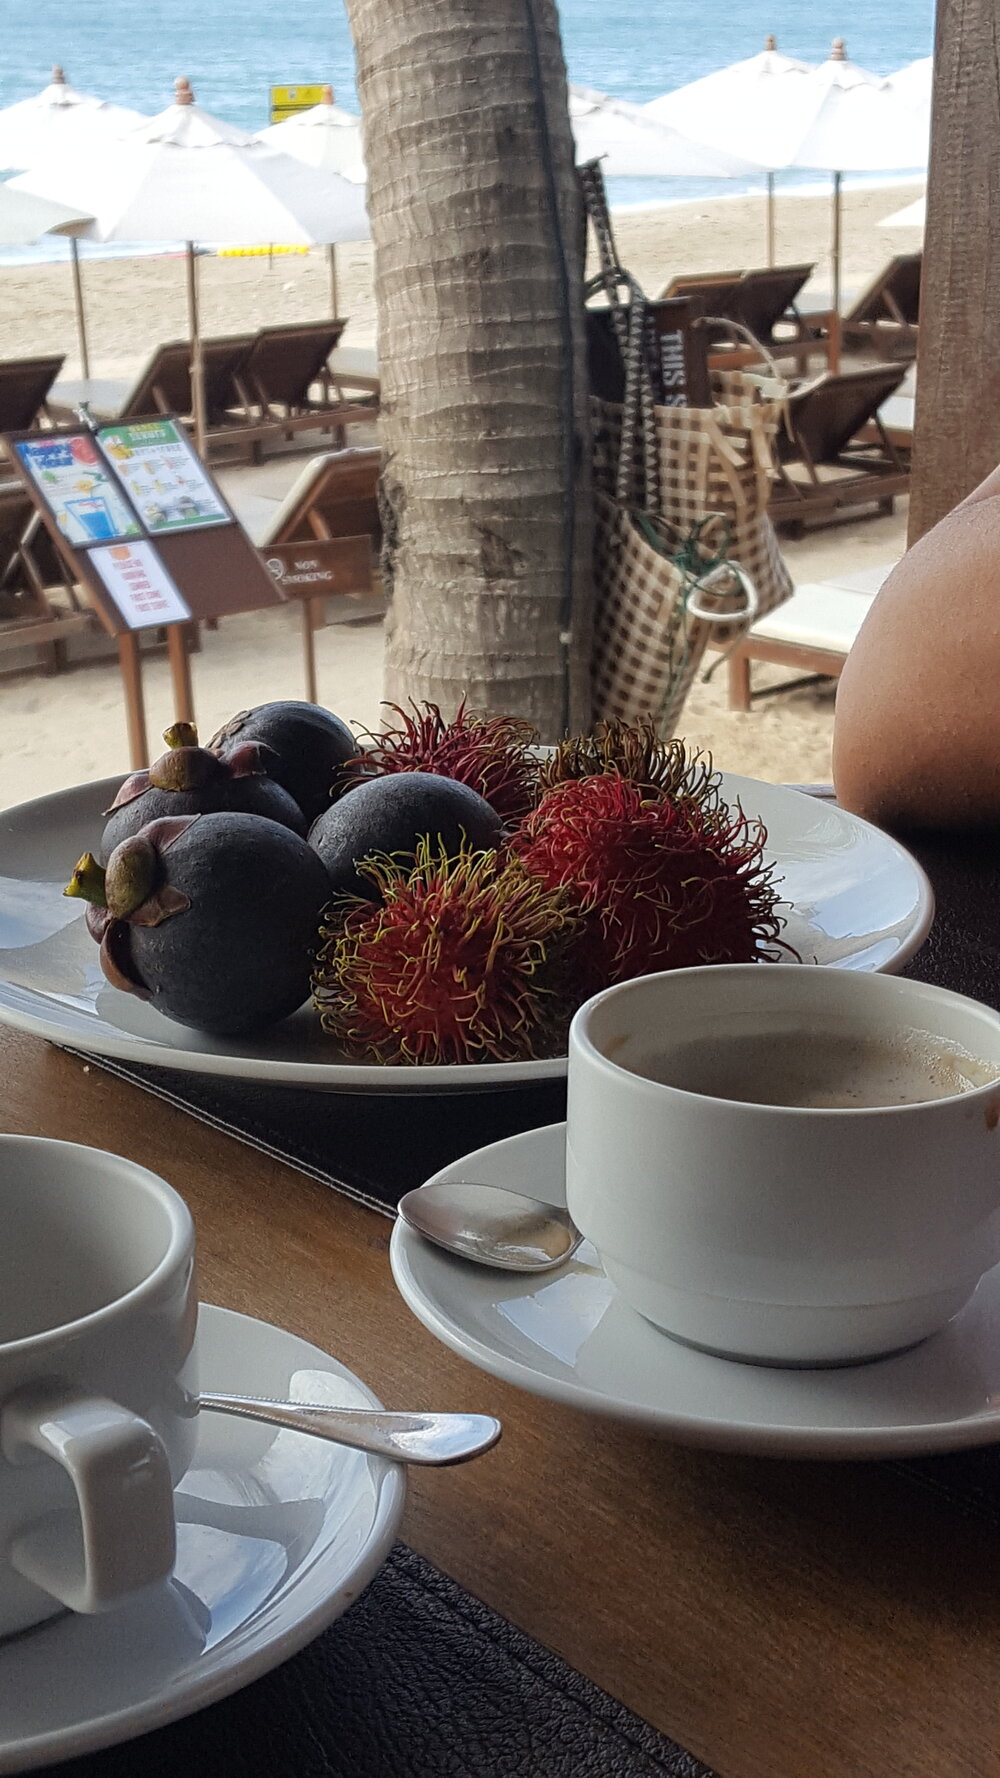 Mangosteens and Rambutans were the fruit of the season